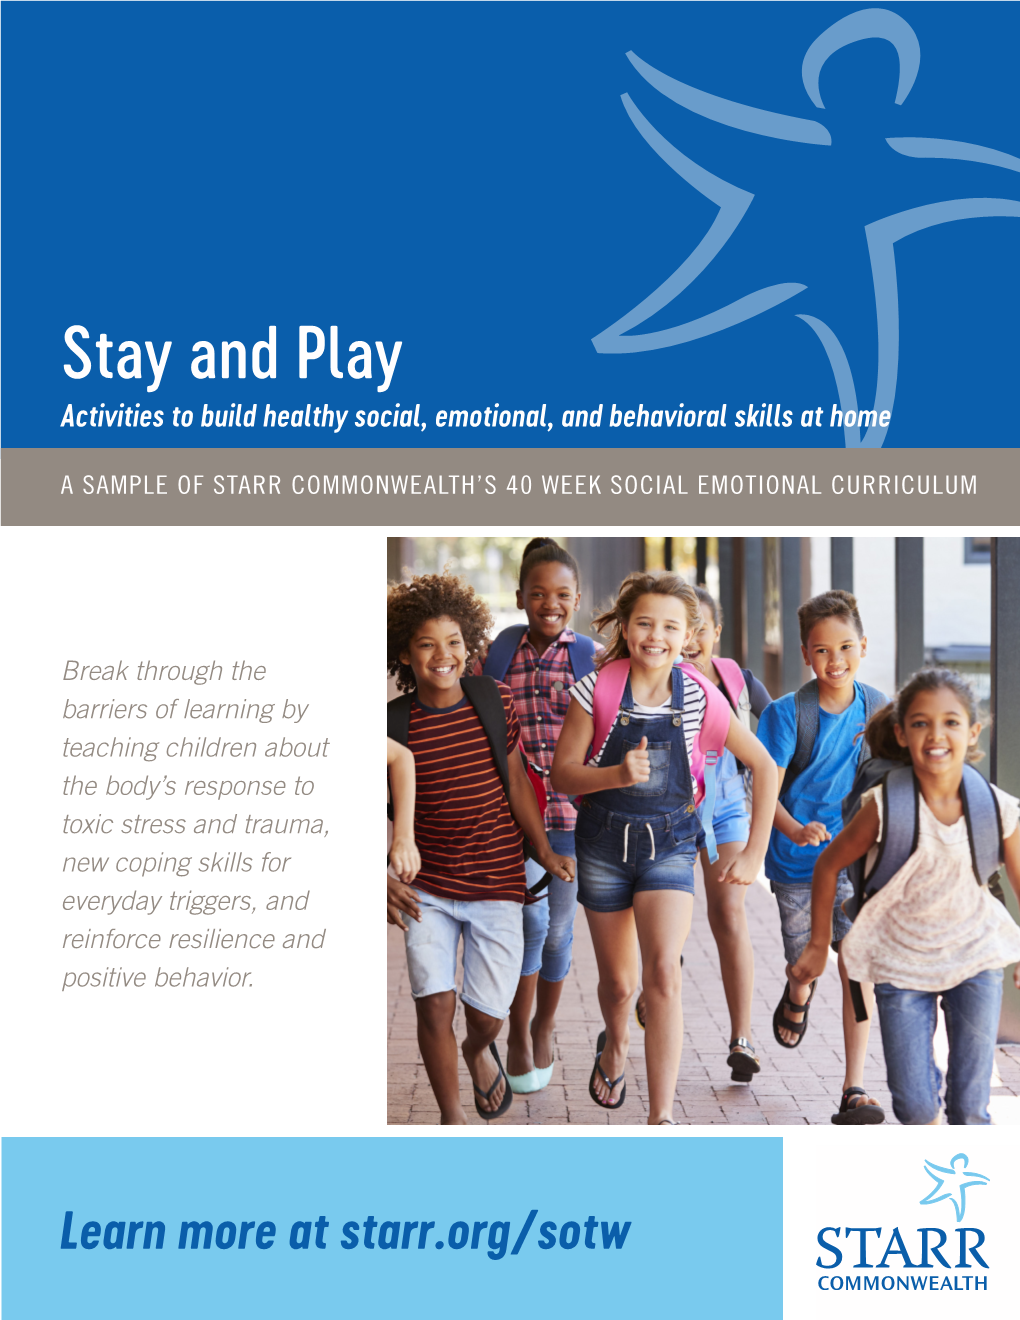 Stay and Play Activities to Build Healthy Social, Emotional, and Behavioral Skills at Home